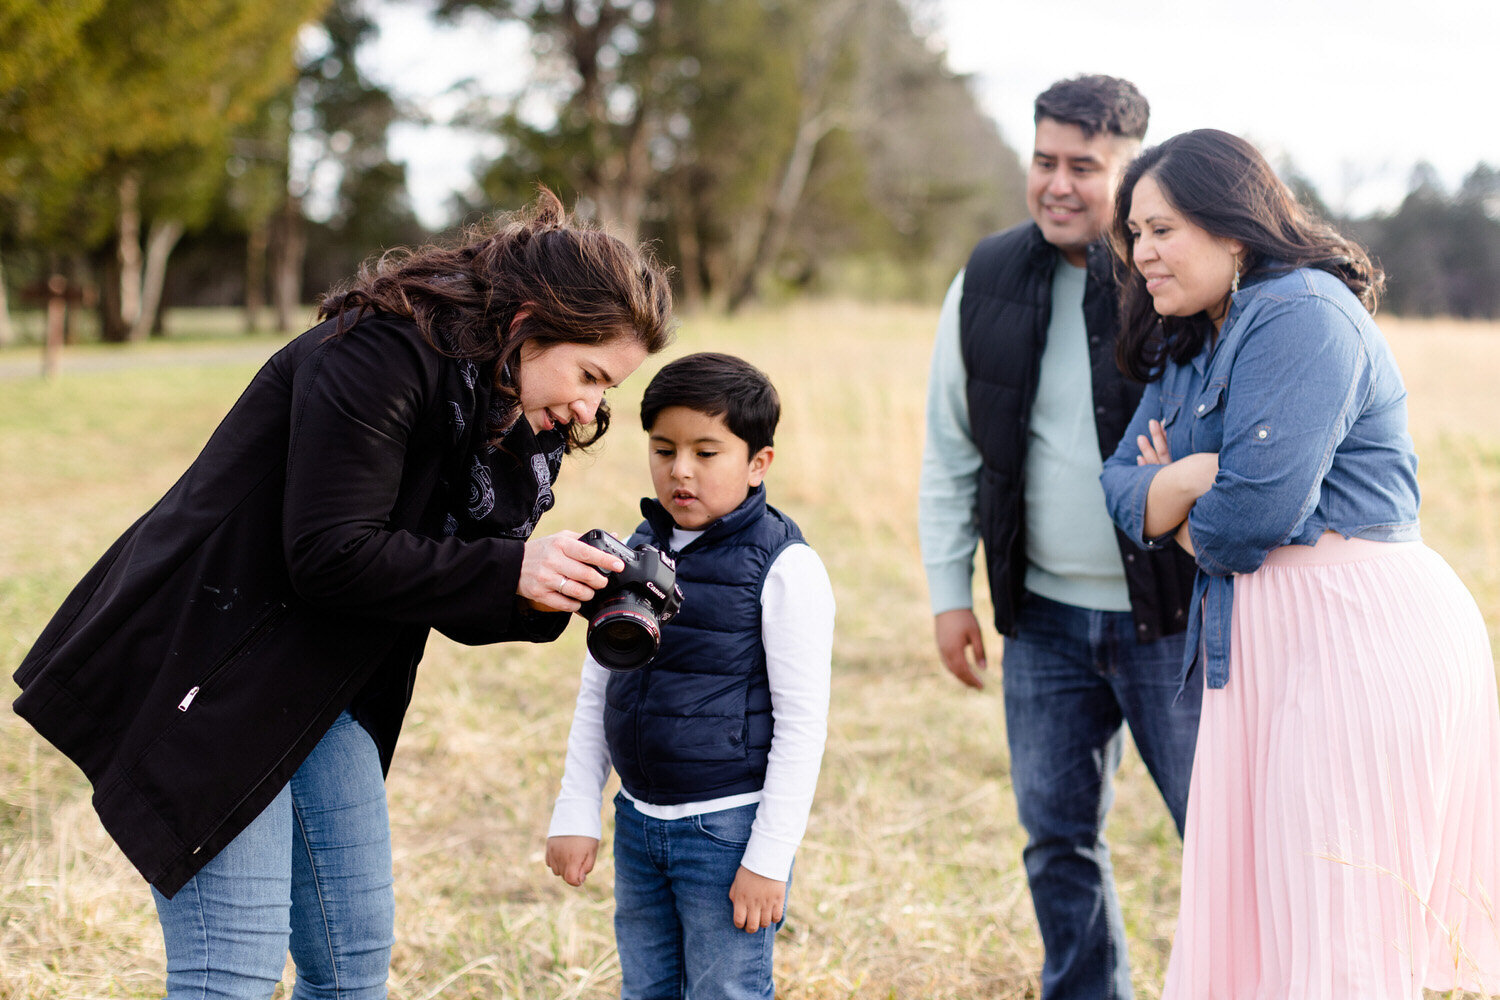 photographer showing child a picture on her camera while the child's parents watch behind him